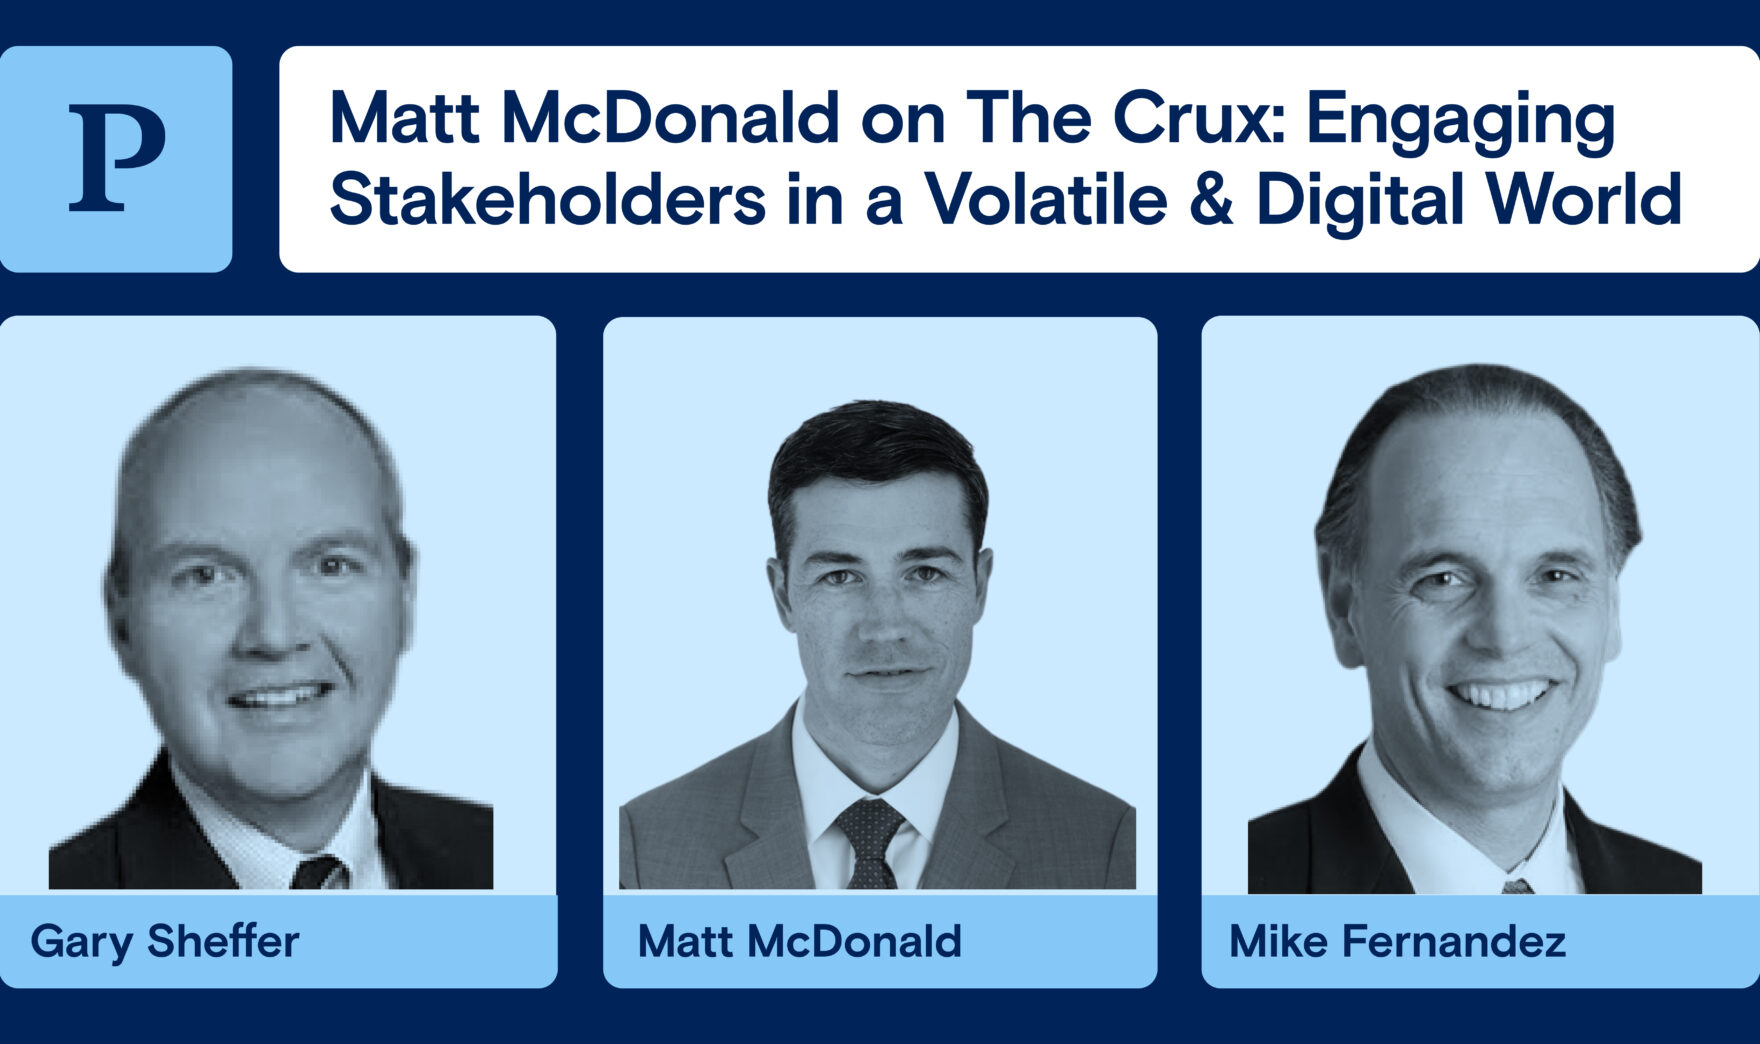 Matt McDonald on The Crux: Engaging Stakeholders in a Volatile & Digital World